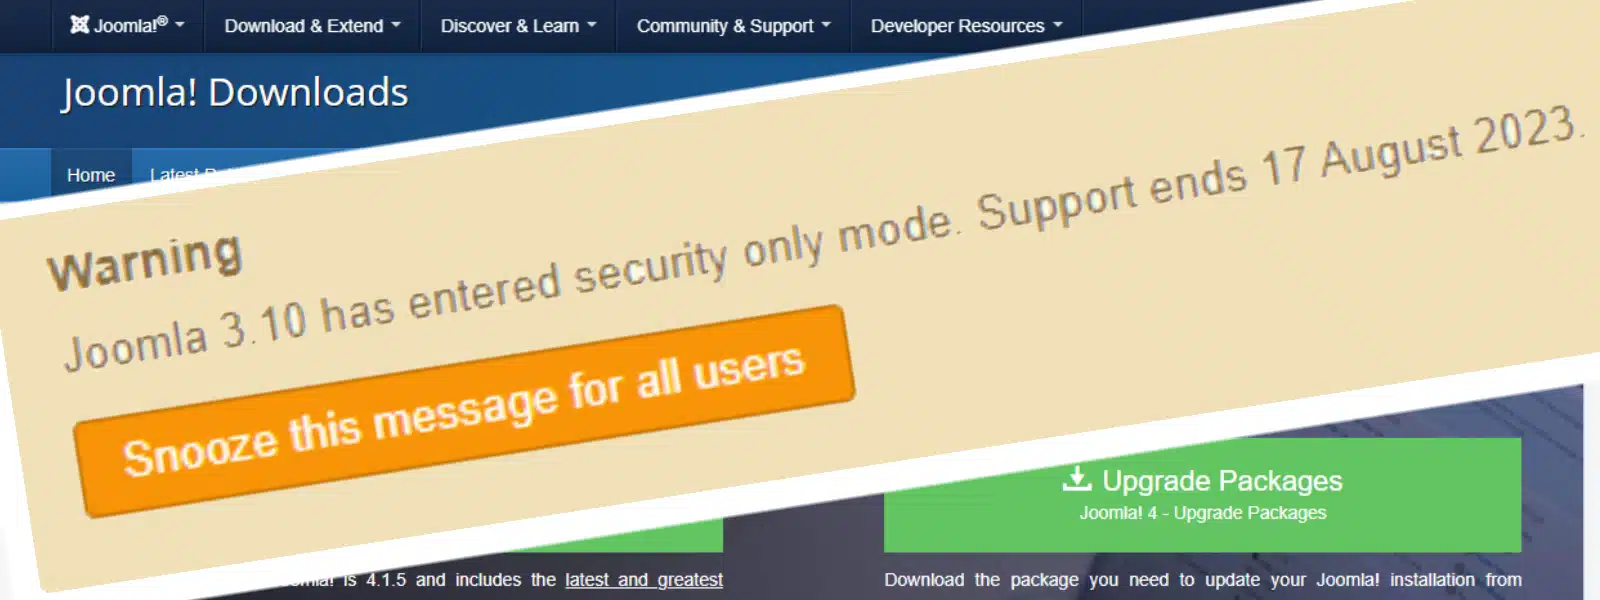 Joomla 3.10 Has Entered Security Only Mode. Support Ends 17 August 2023 Thumbnail